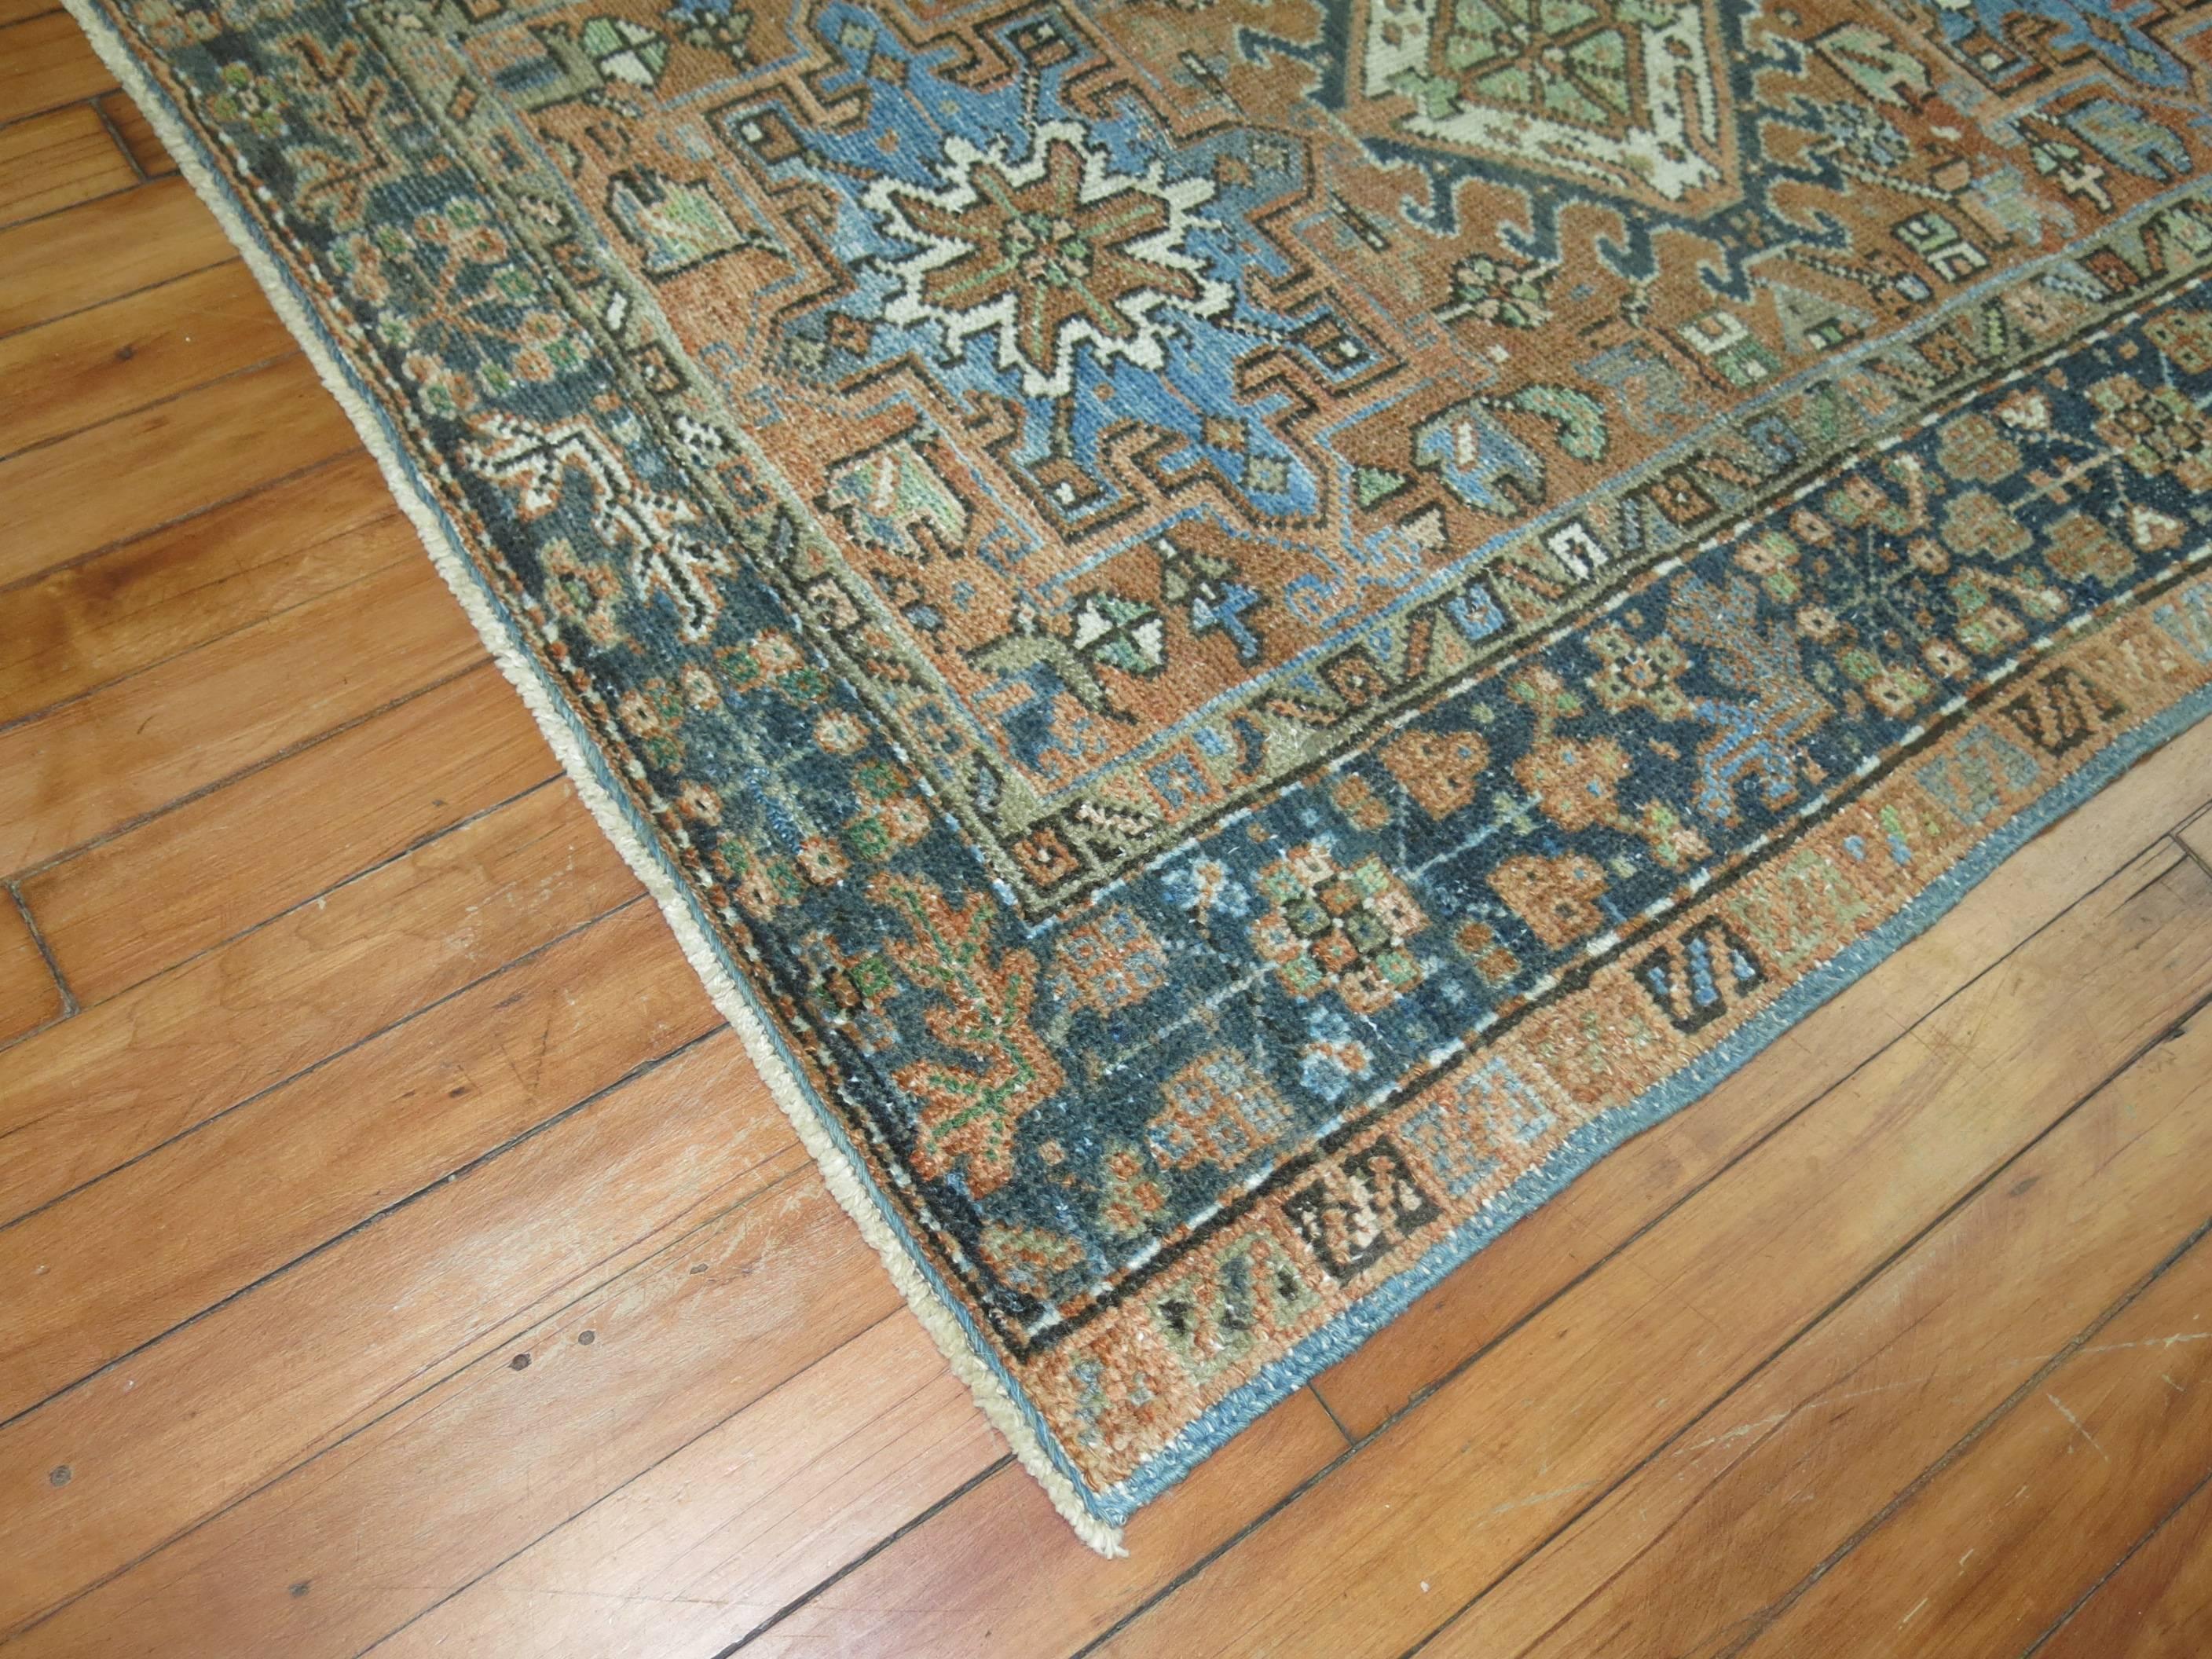 Persian Heriz throw rug. Soft brown field with touches of soft blue you seldom find in rugs from this region.